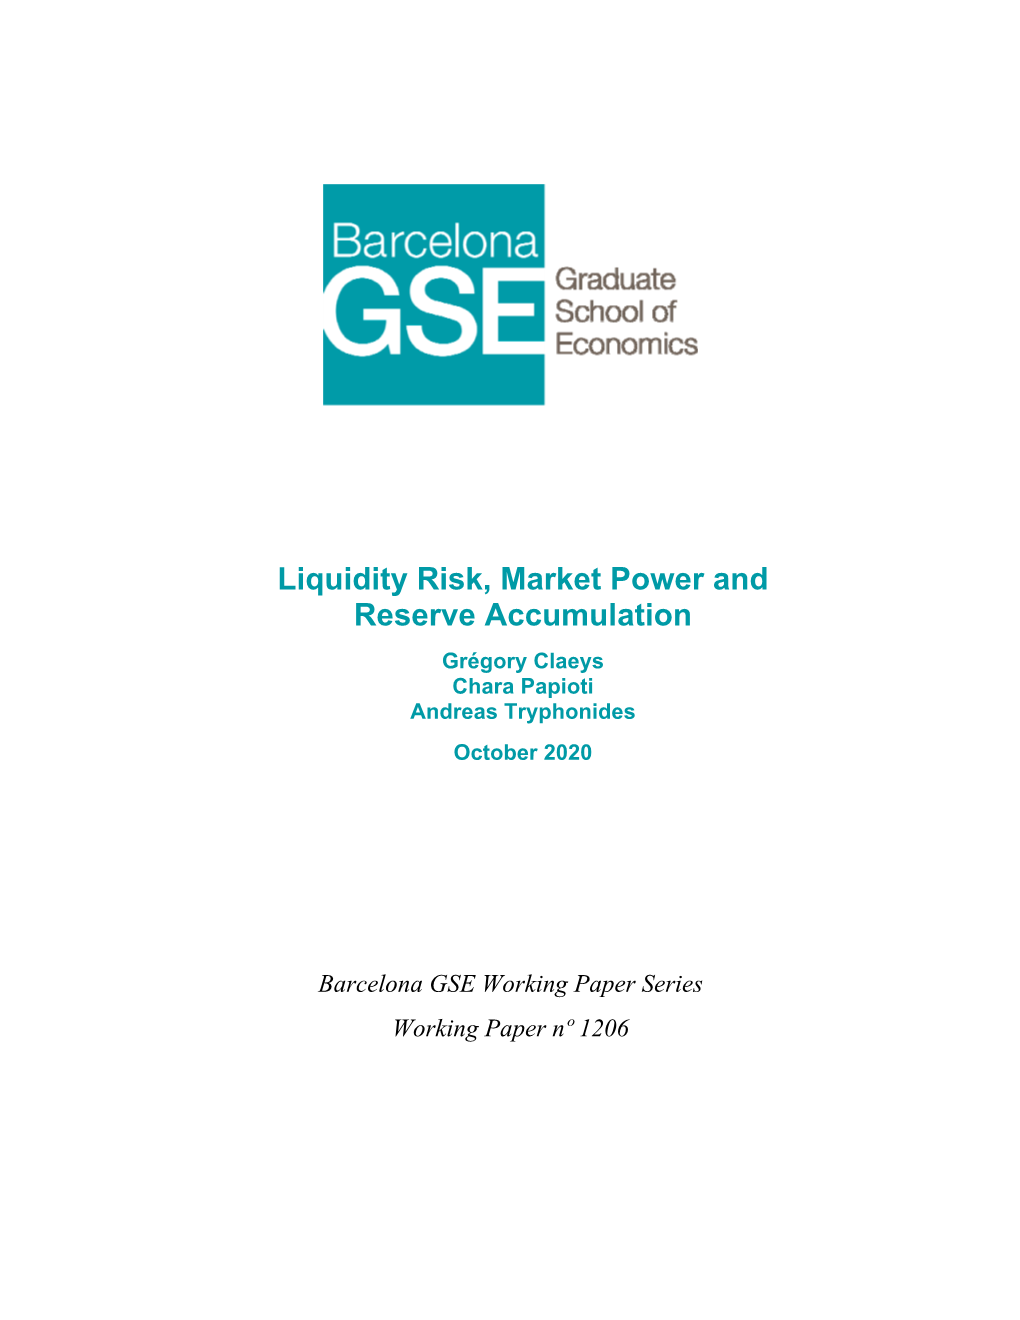 Liquidity Risk, Market Power and Reserve Accumulation Grégory Claeys Chara Papioti Andreas Tryphonides October 2020